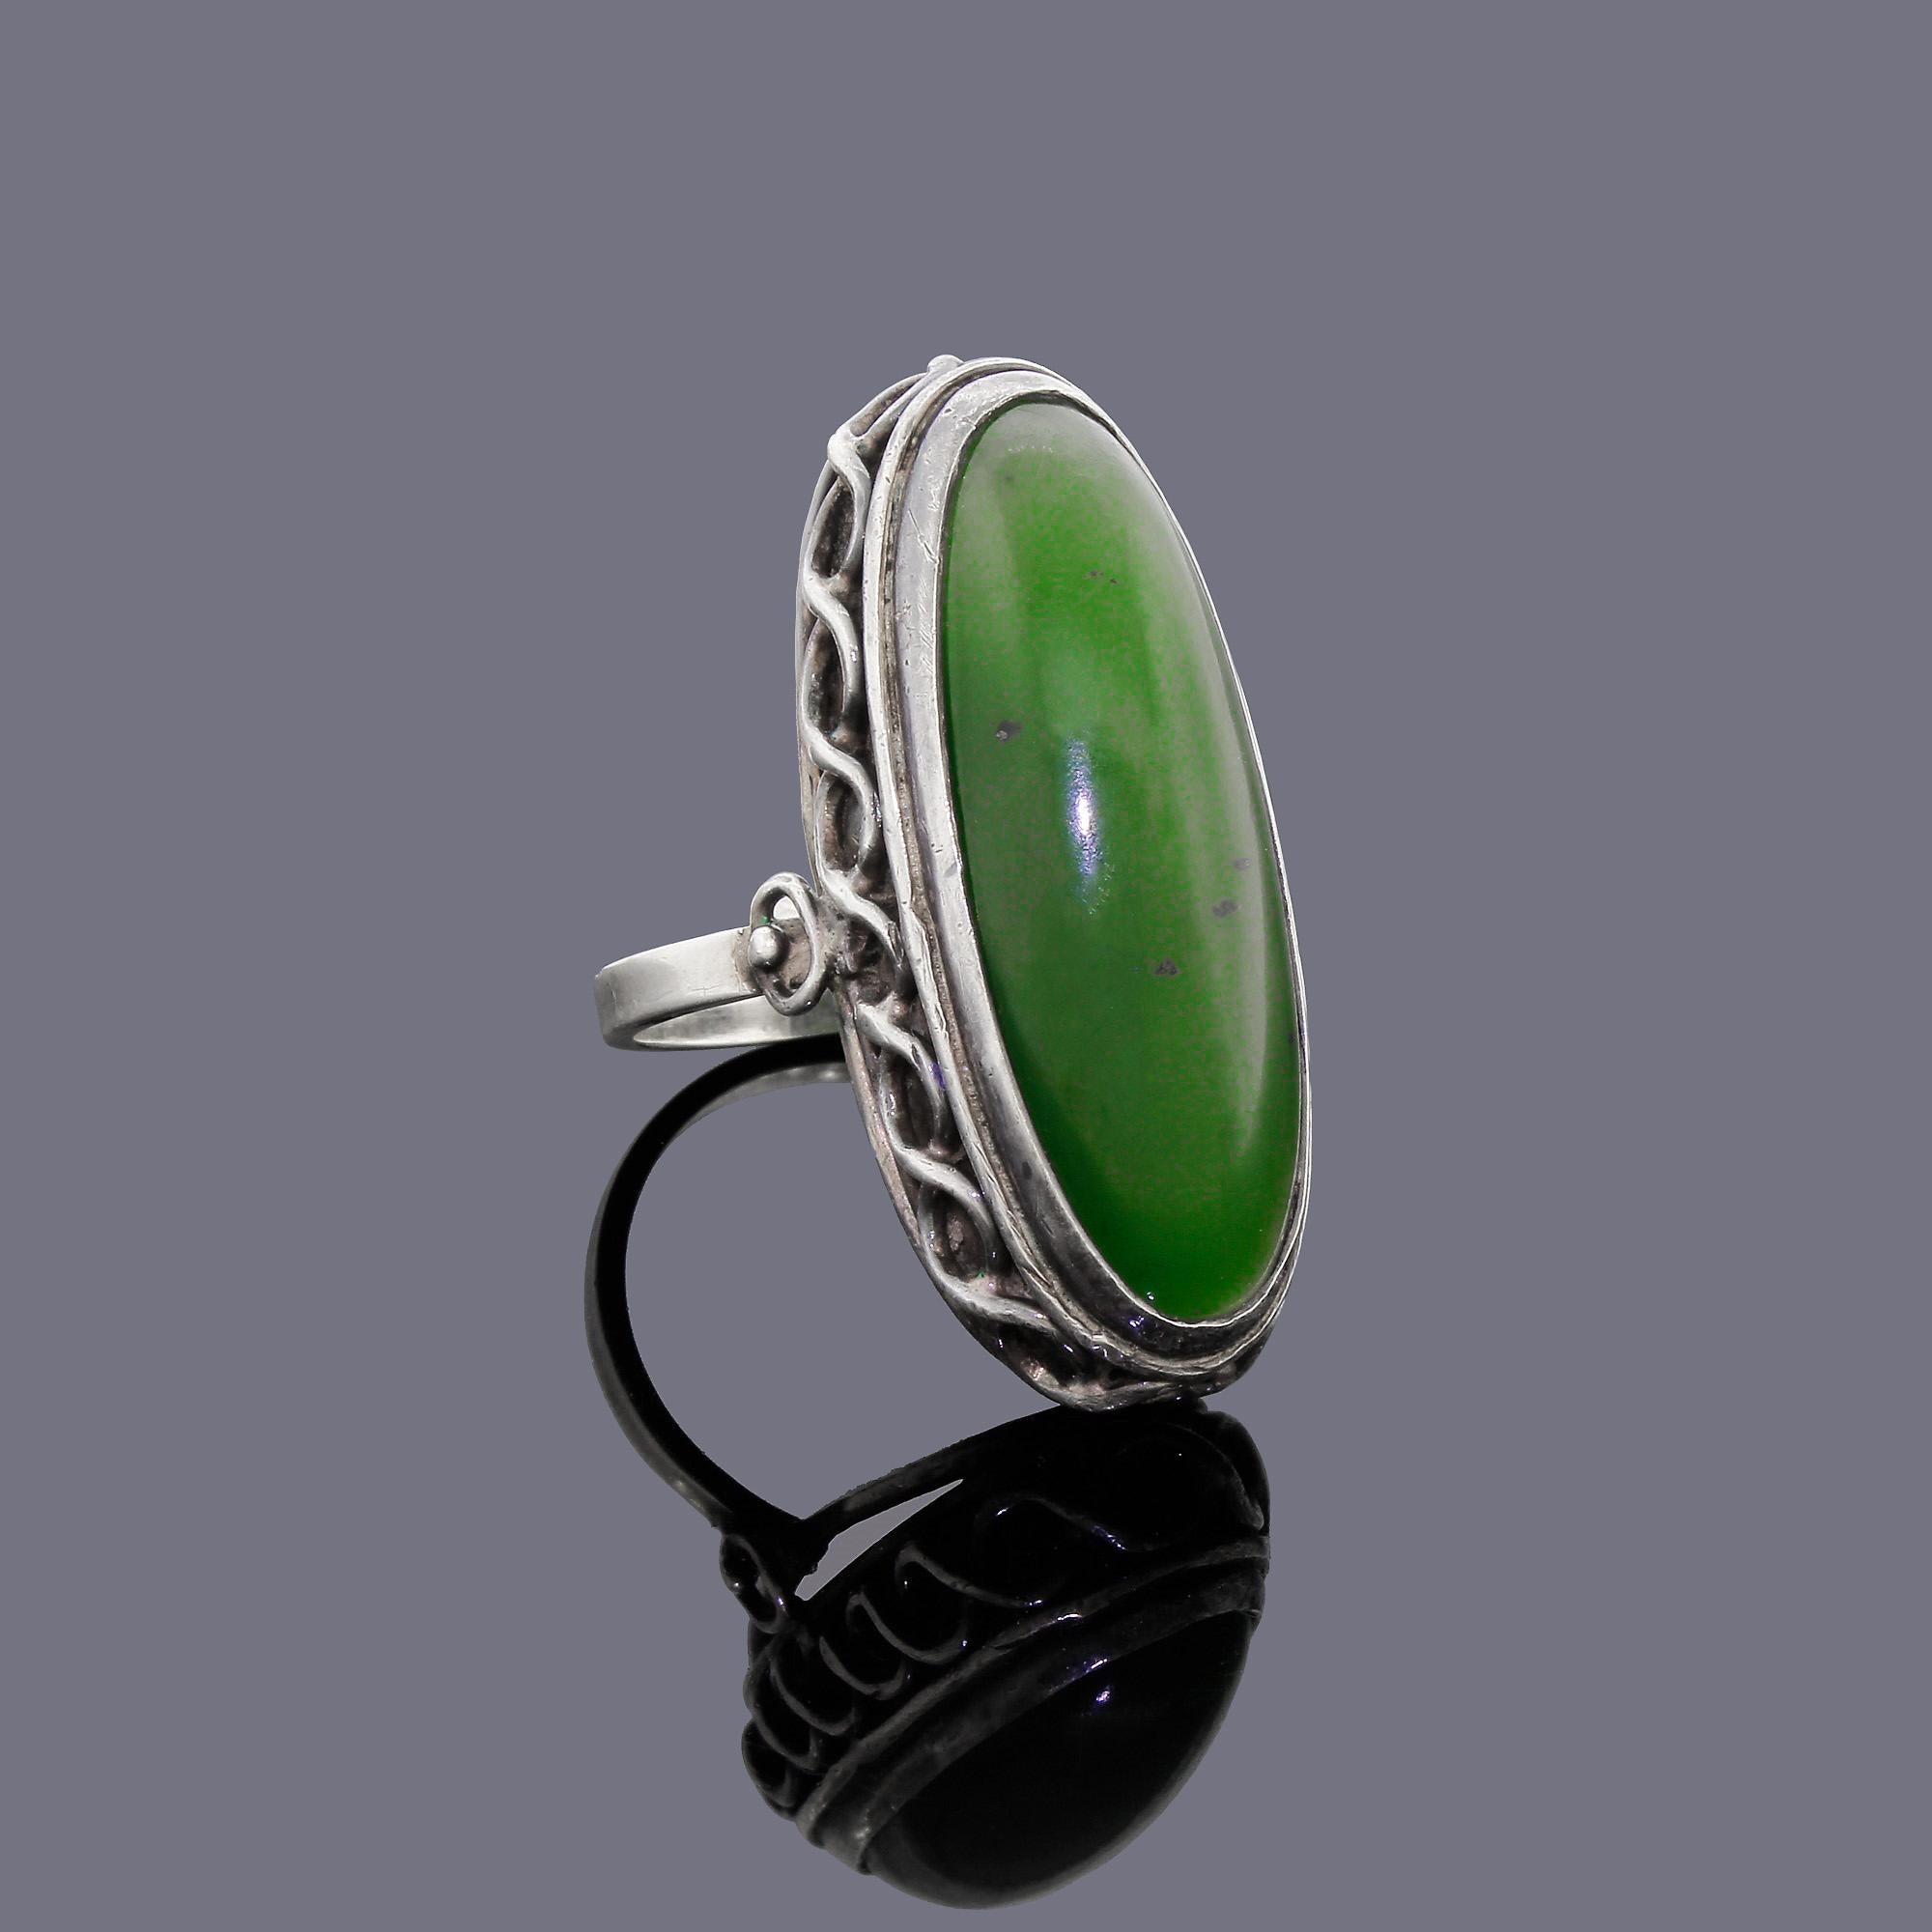 New 925 Sterling Silver Ladies Open Ring set with a Nephrite Jade sizes J-R